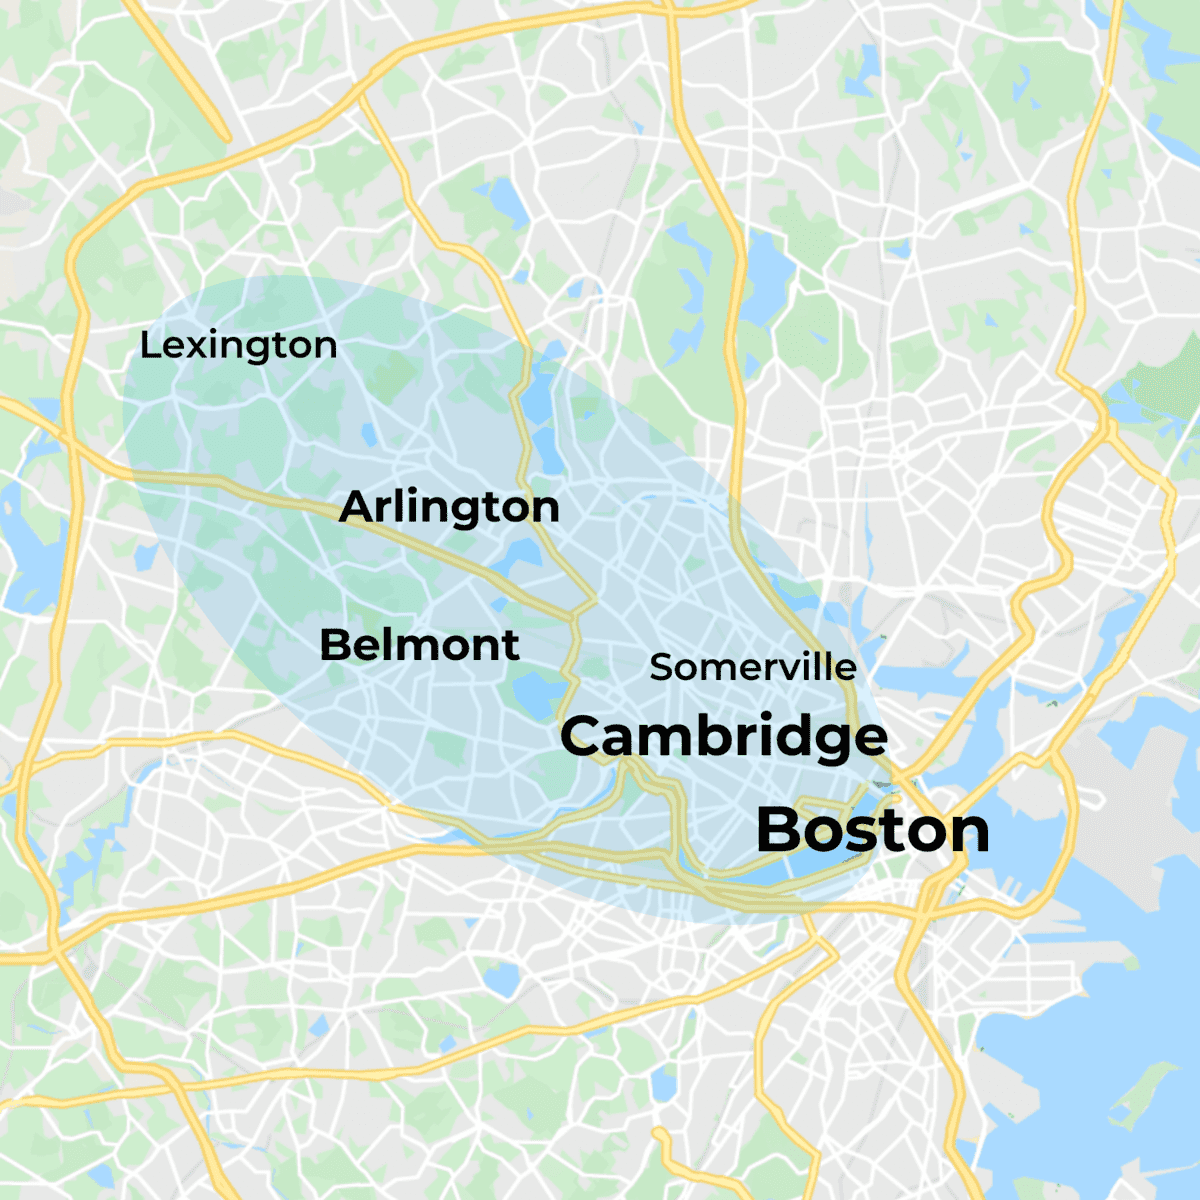 MovementX physical therapy in Boston location service coverage map of Cambridge, Arlington, Belmont, Lexington, and Somerville